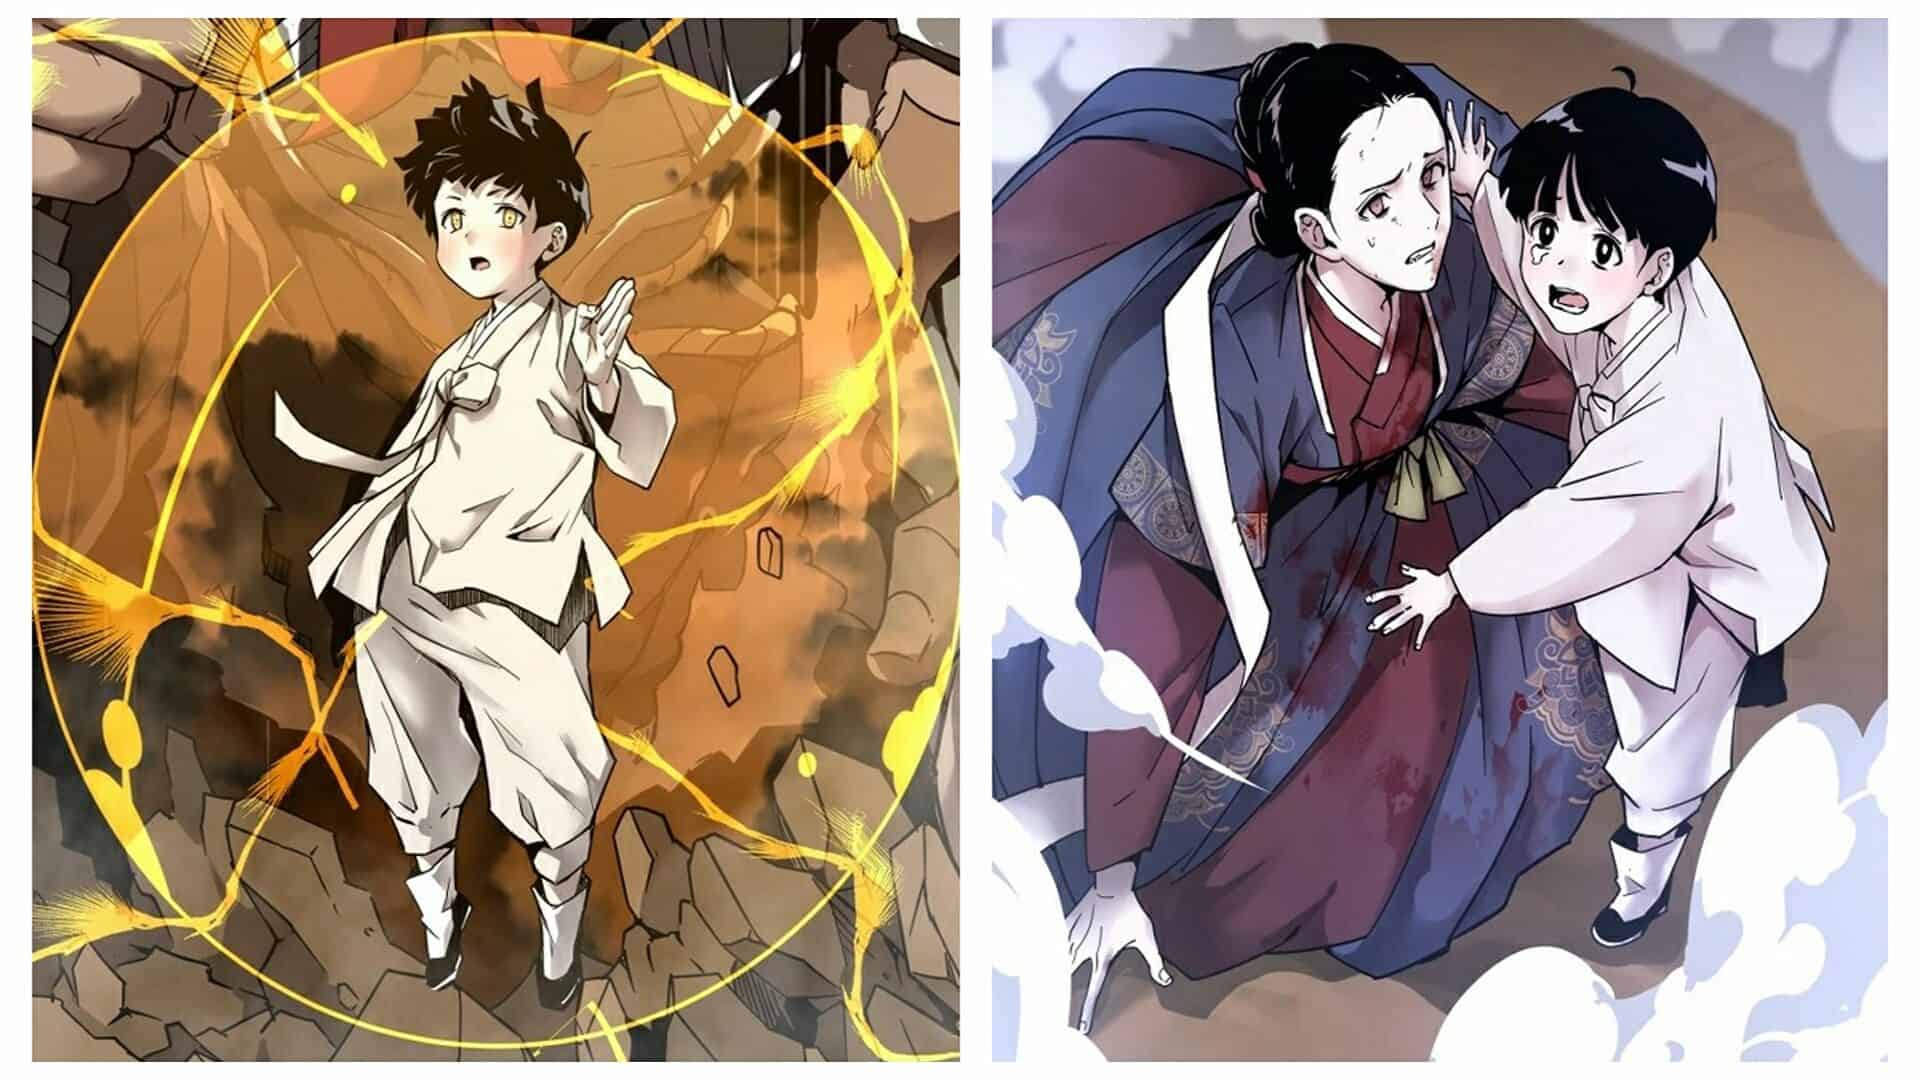 Nak-Bin After Being Possessed By The God Of War Ja-Oji (Left) And After He Regained His Senses (Right) - The Shaman Chapter 2